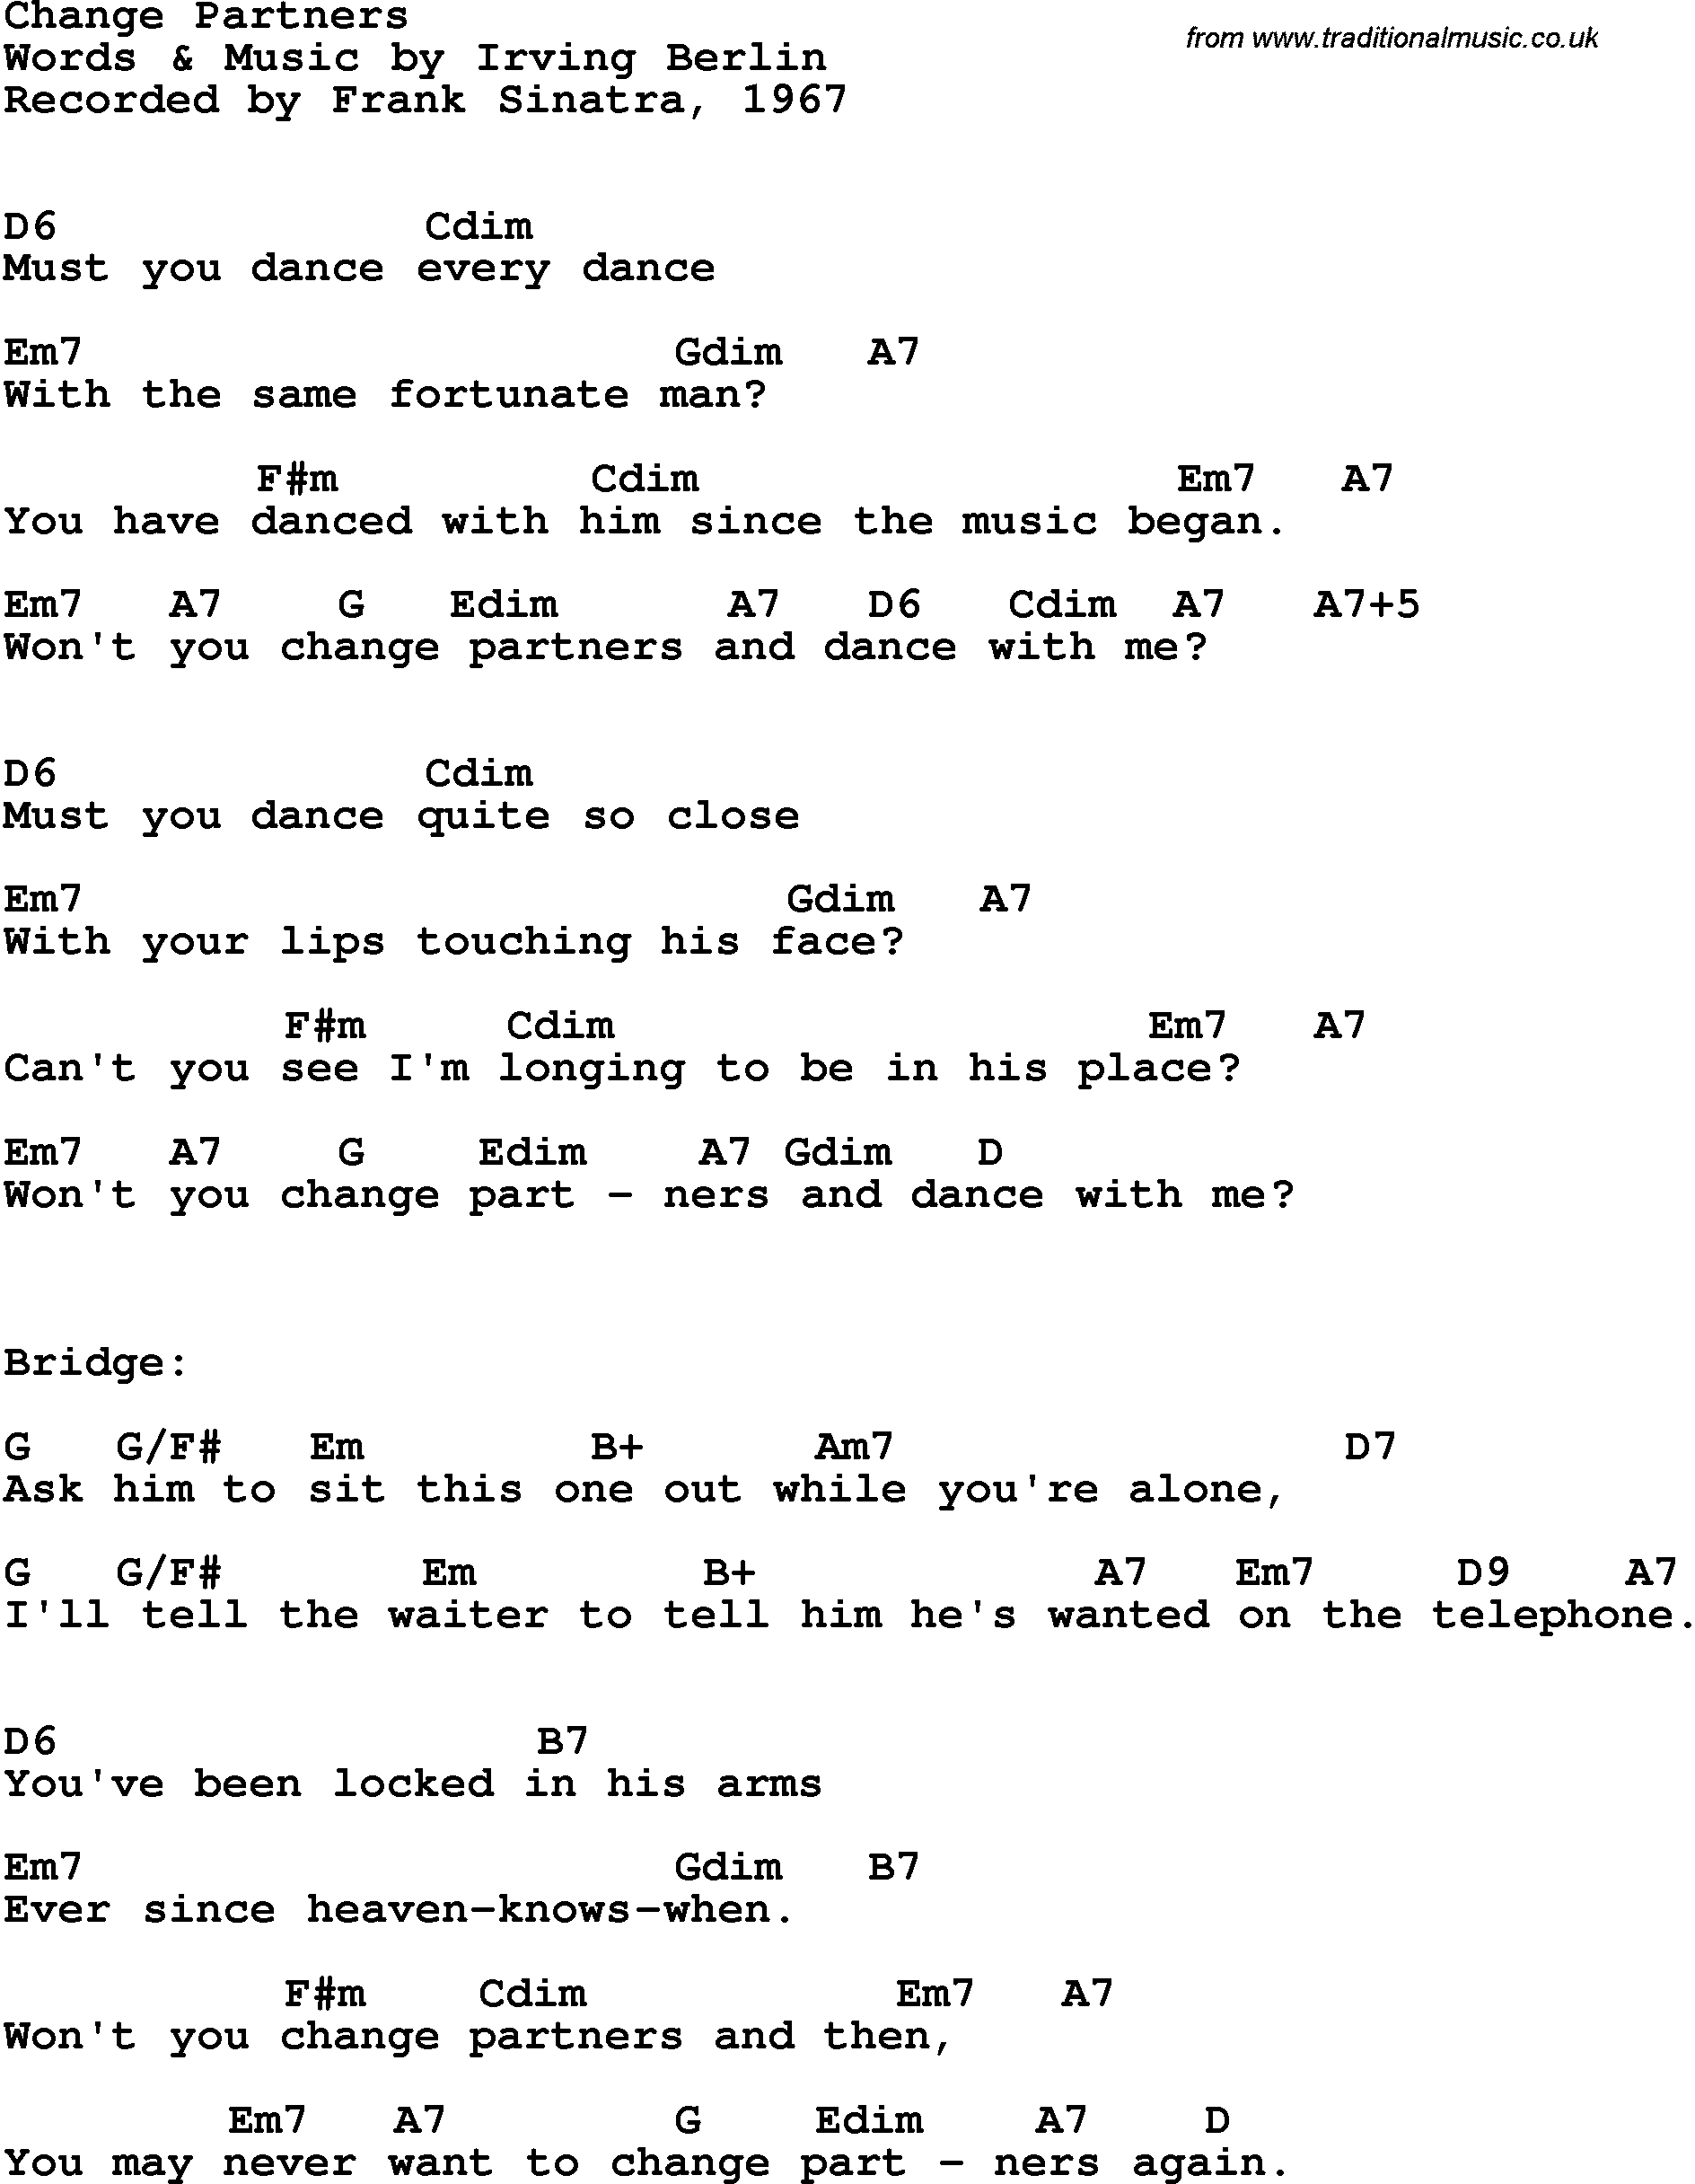 Song Lyrics with guitar chords for Change Partners - Frank Sinatra, 1967